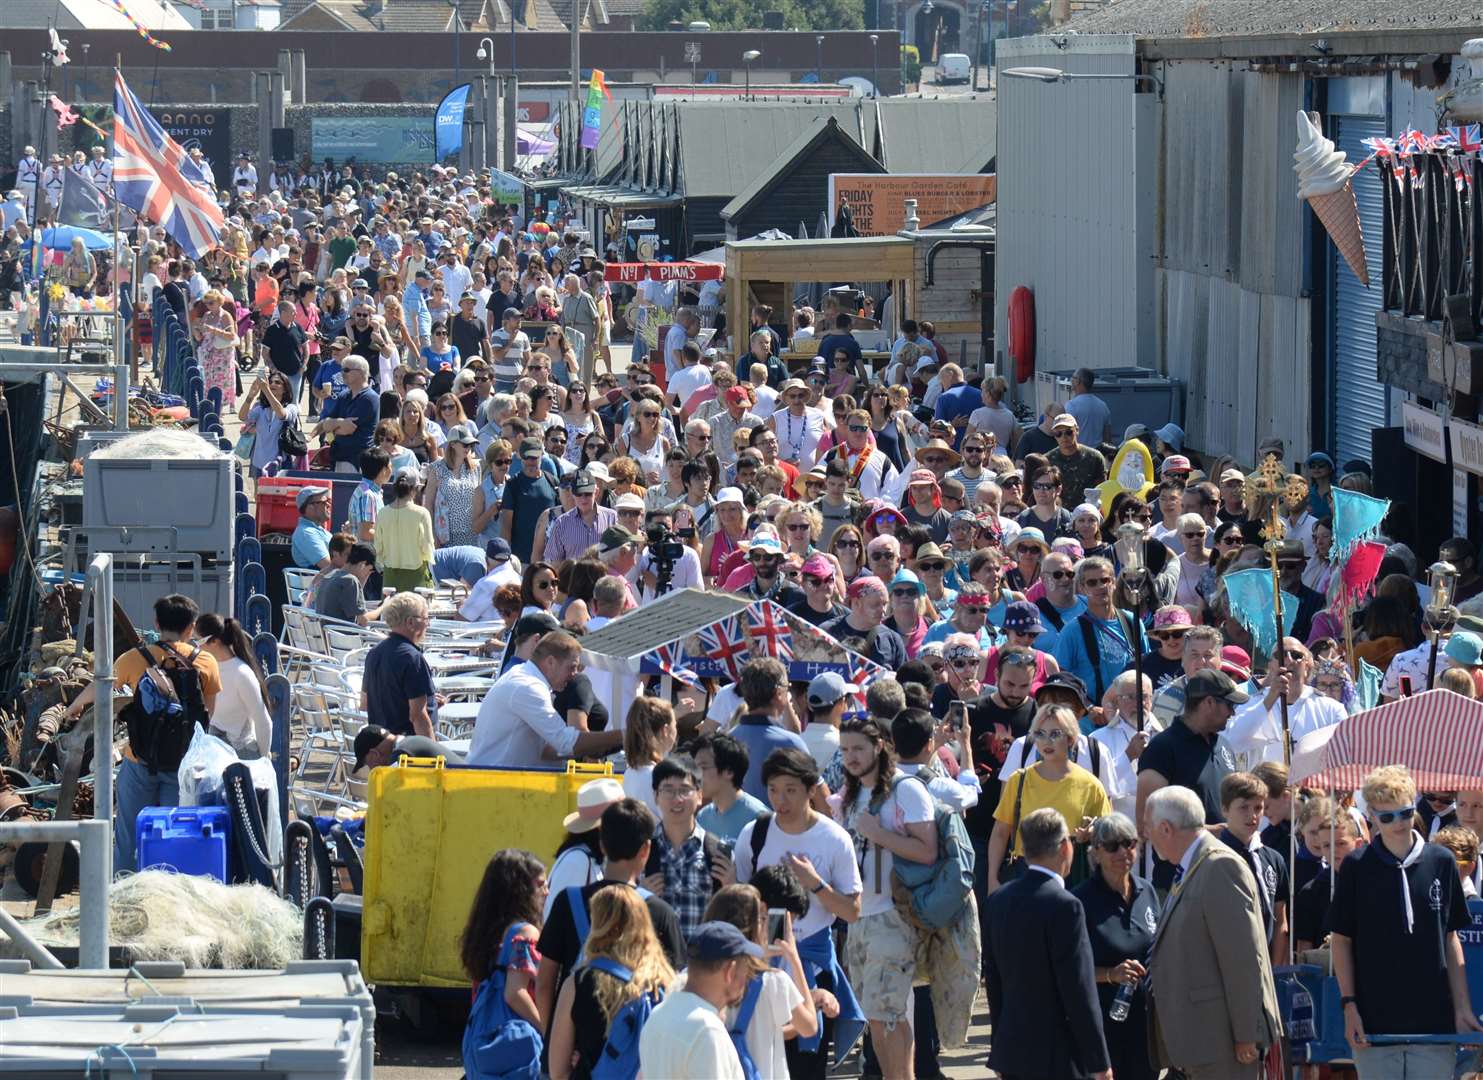 Many people flock to Whitstable each year for a festival celebrating the town’s oysters